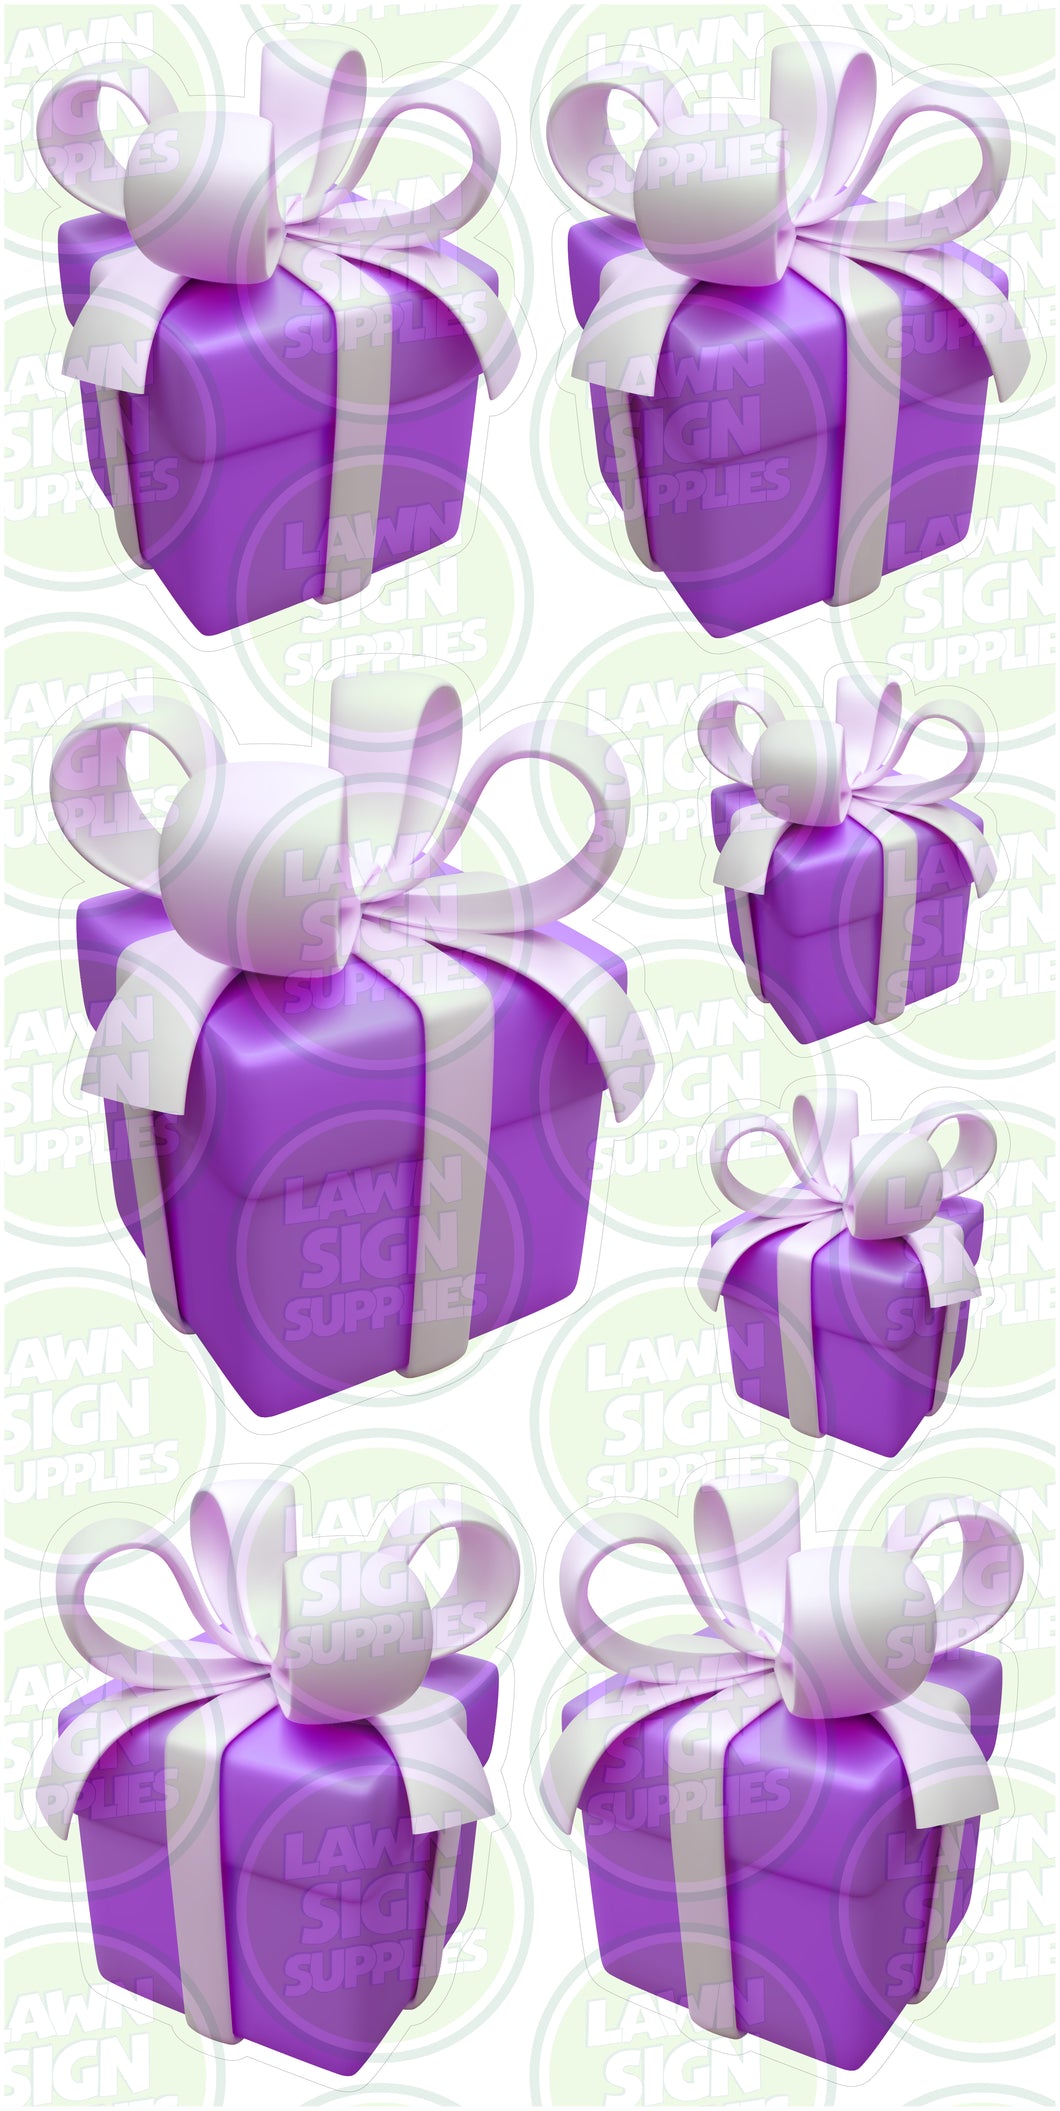 PURPLE GIFT BOXES